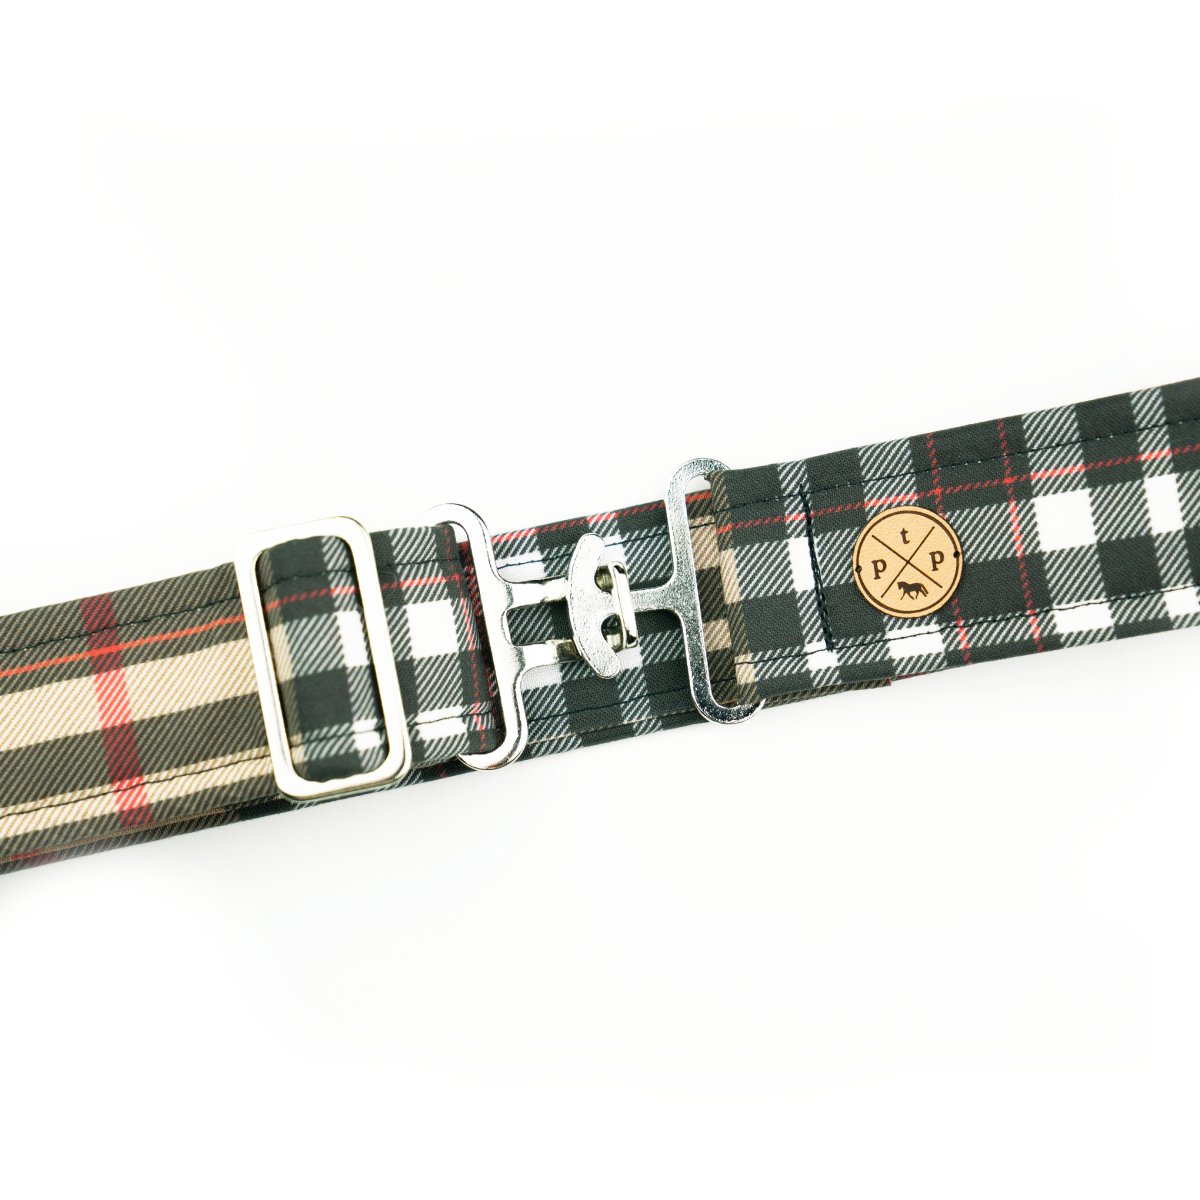 Classy Plaid Belt - Equiluxe Tack